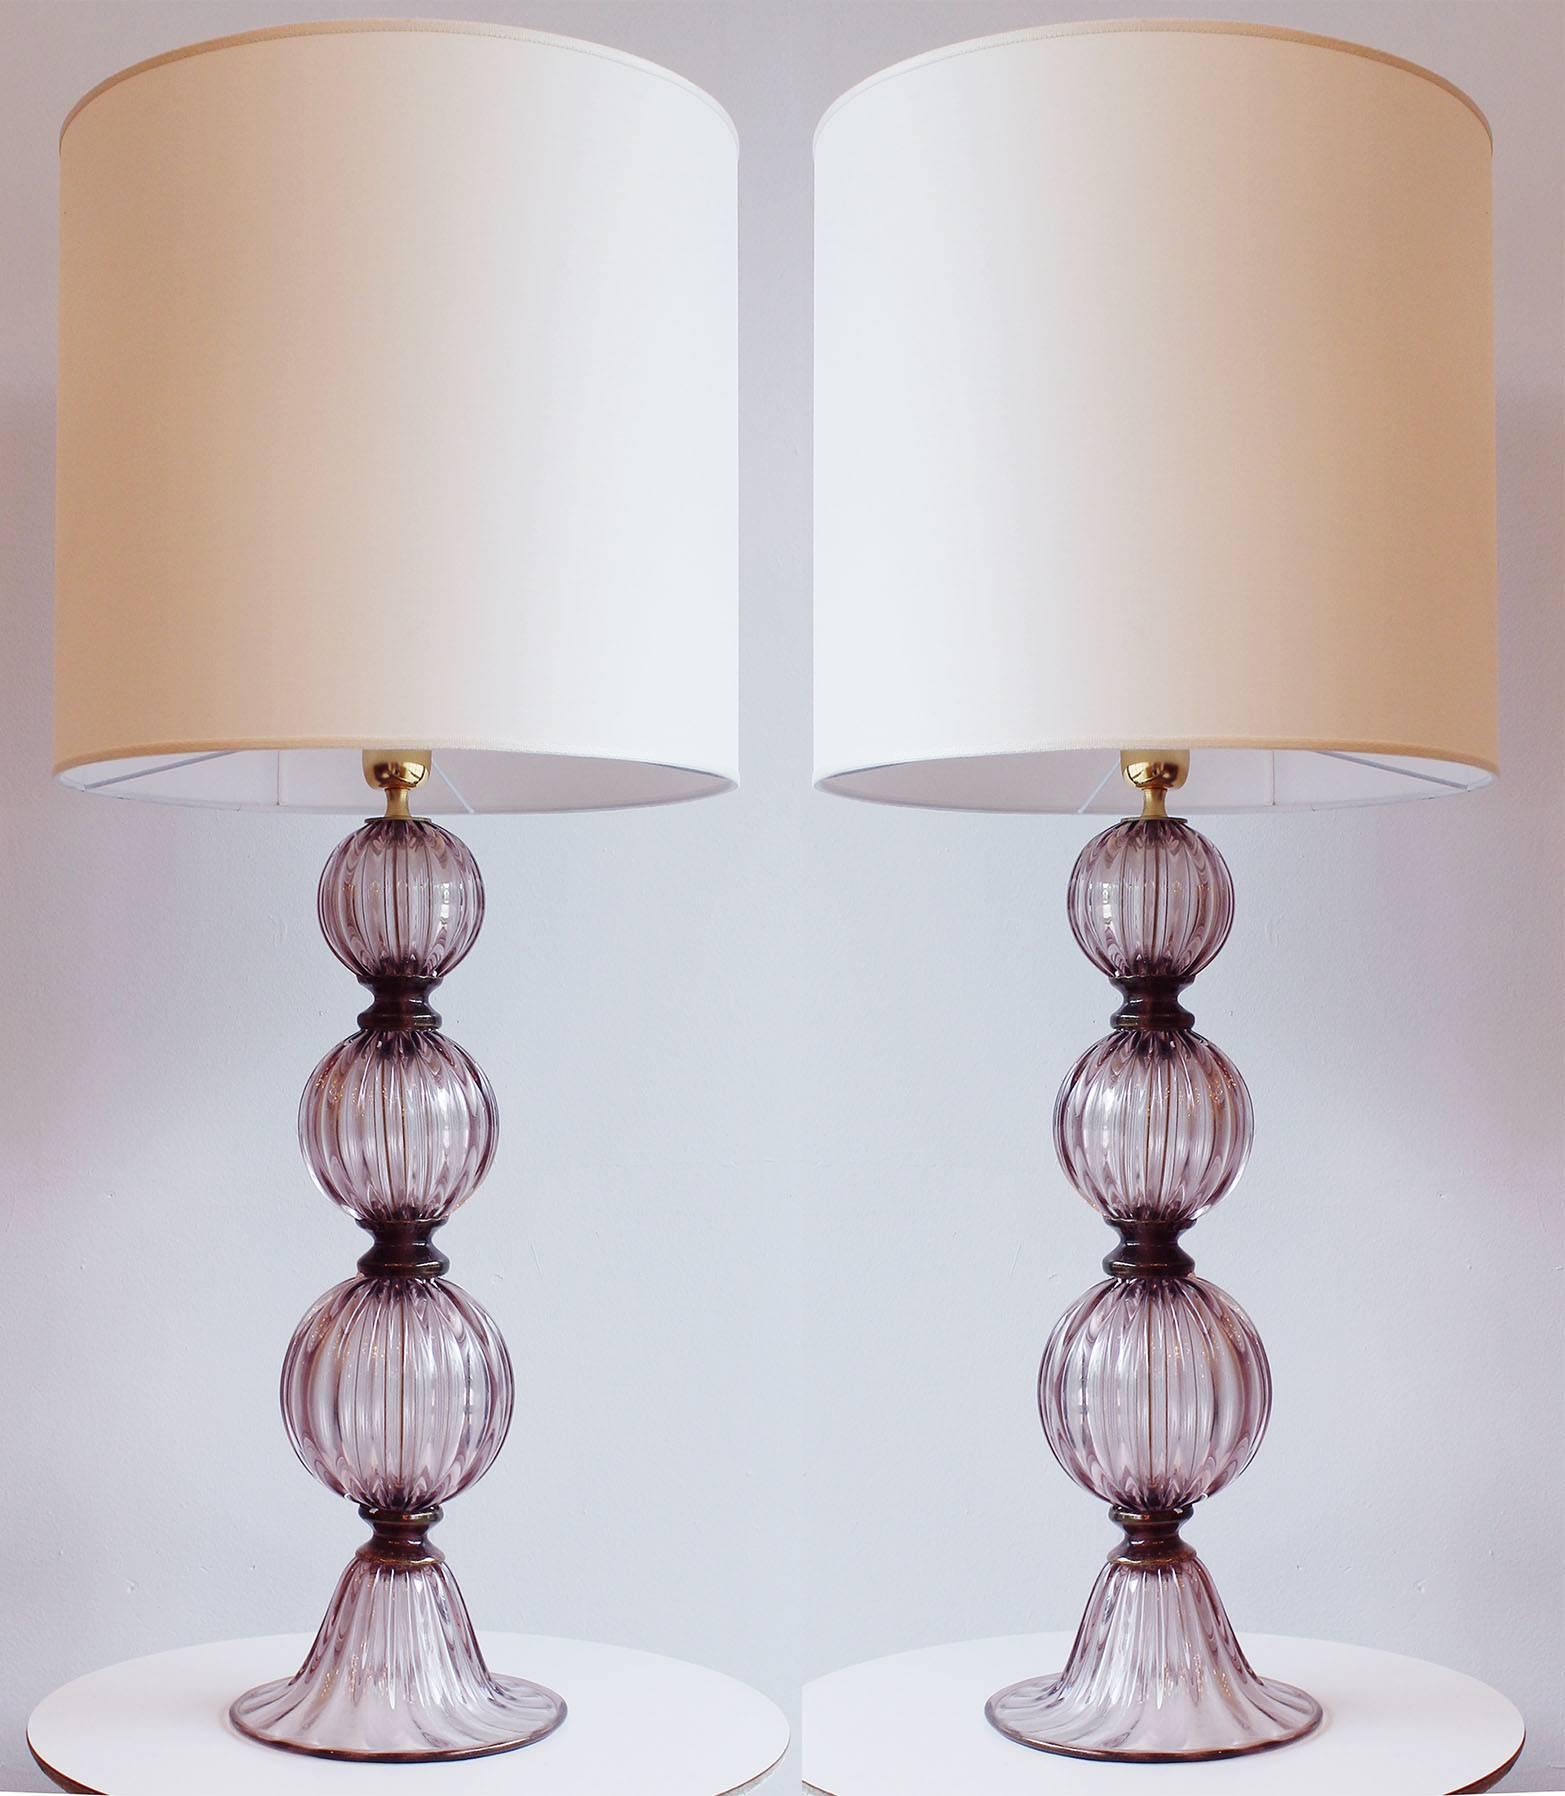 A pair of Murano all glass tassel lamps, with amethyst colored glass and gold accents. The lamps are signed Murano. 

Please note the height in description is the height to the socket, including brass detail, without the shade. The shades are not